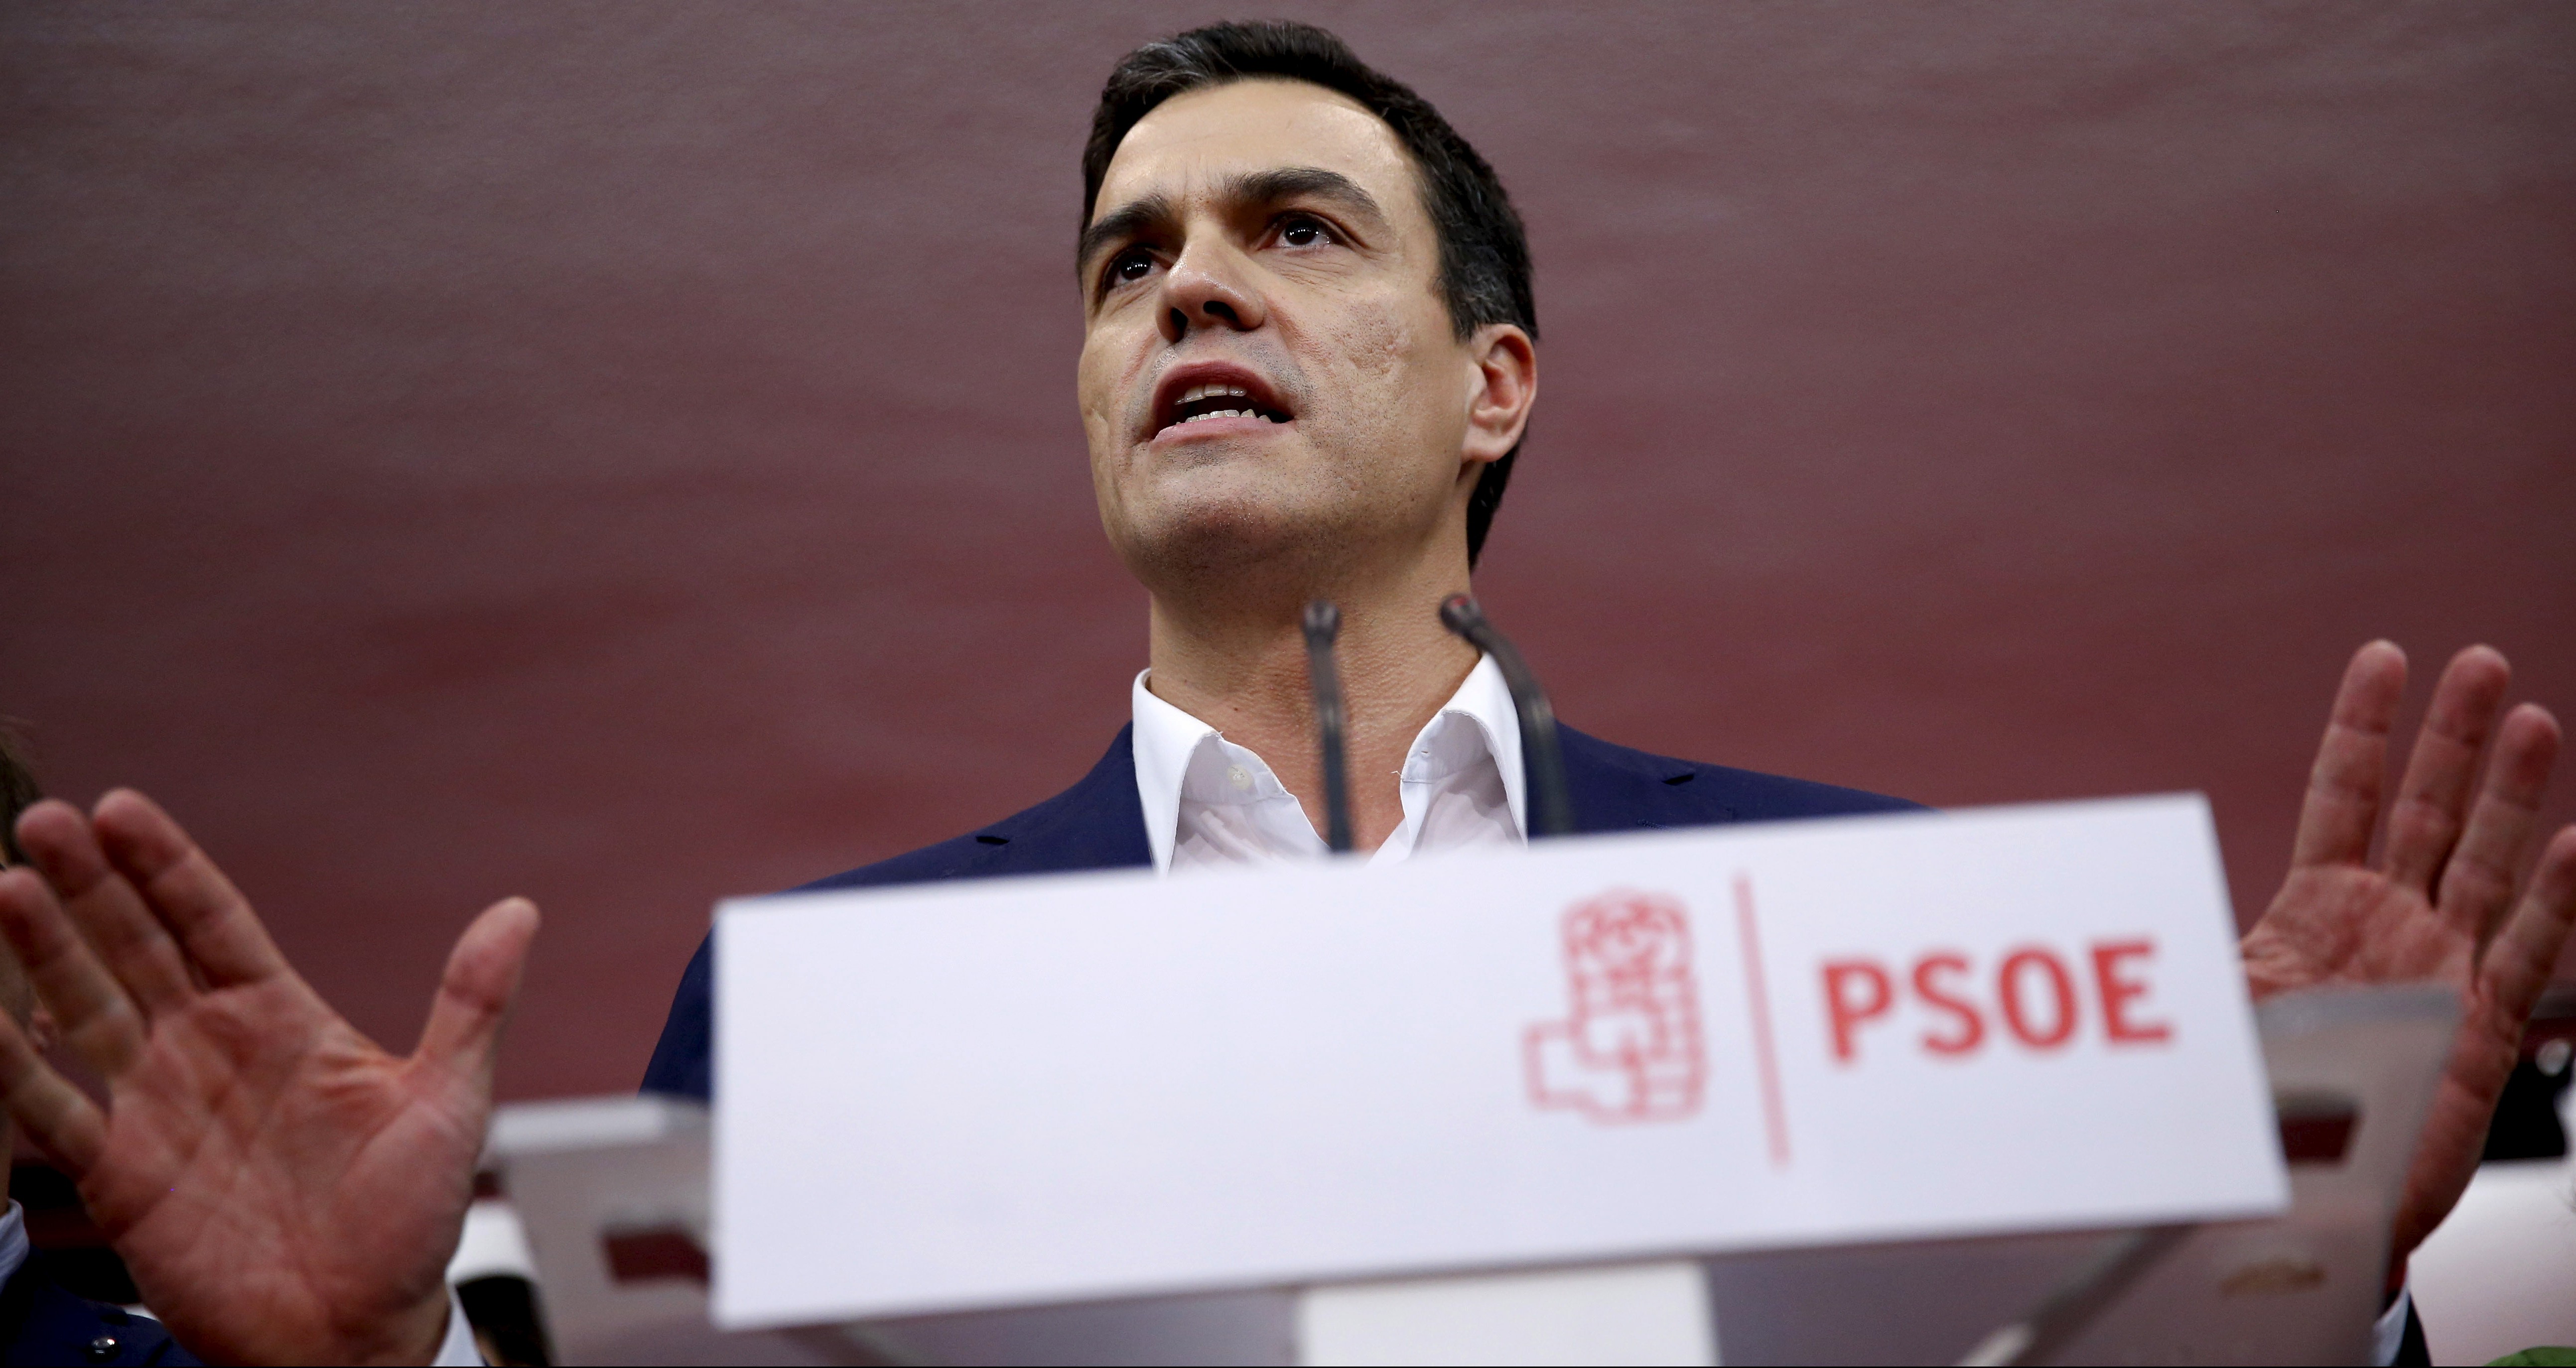 Spain's Socialist Party (PSOE) leader Pedro Sanchez speaks at party headquarters after results were announced in Spain's general election in Madrid, Spain, December 20, 2015. REUTERS/Juan Medina - RTX1ZJ0P